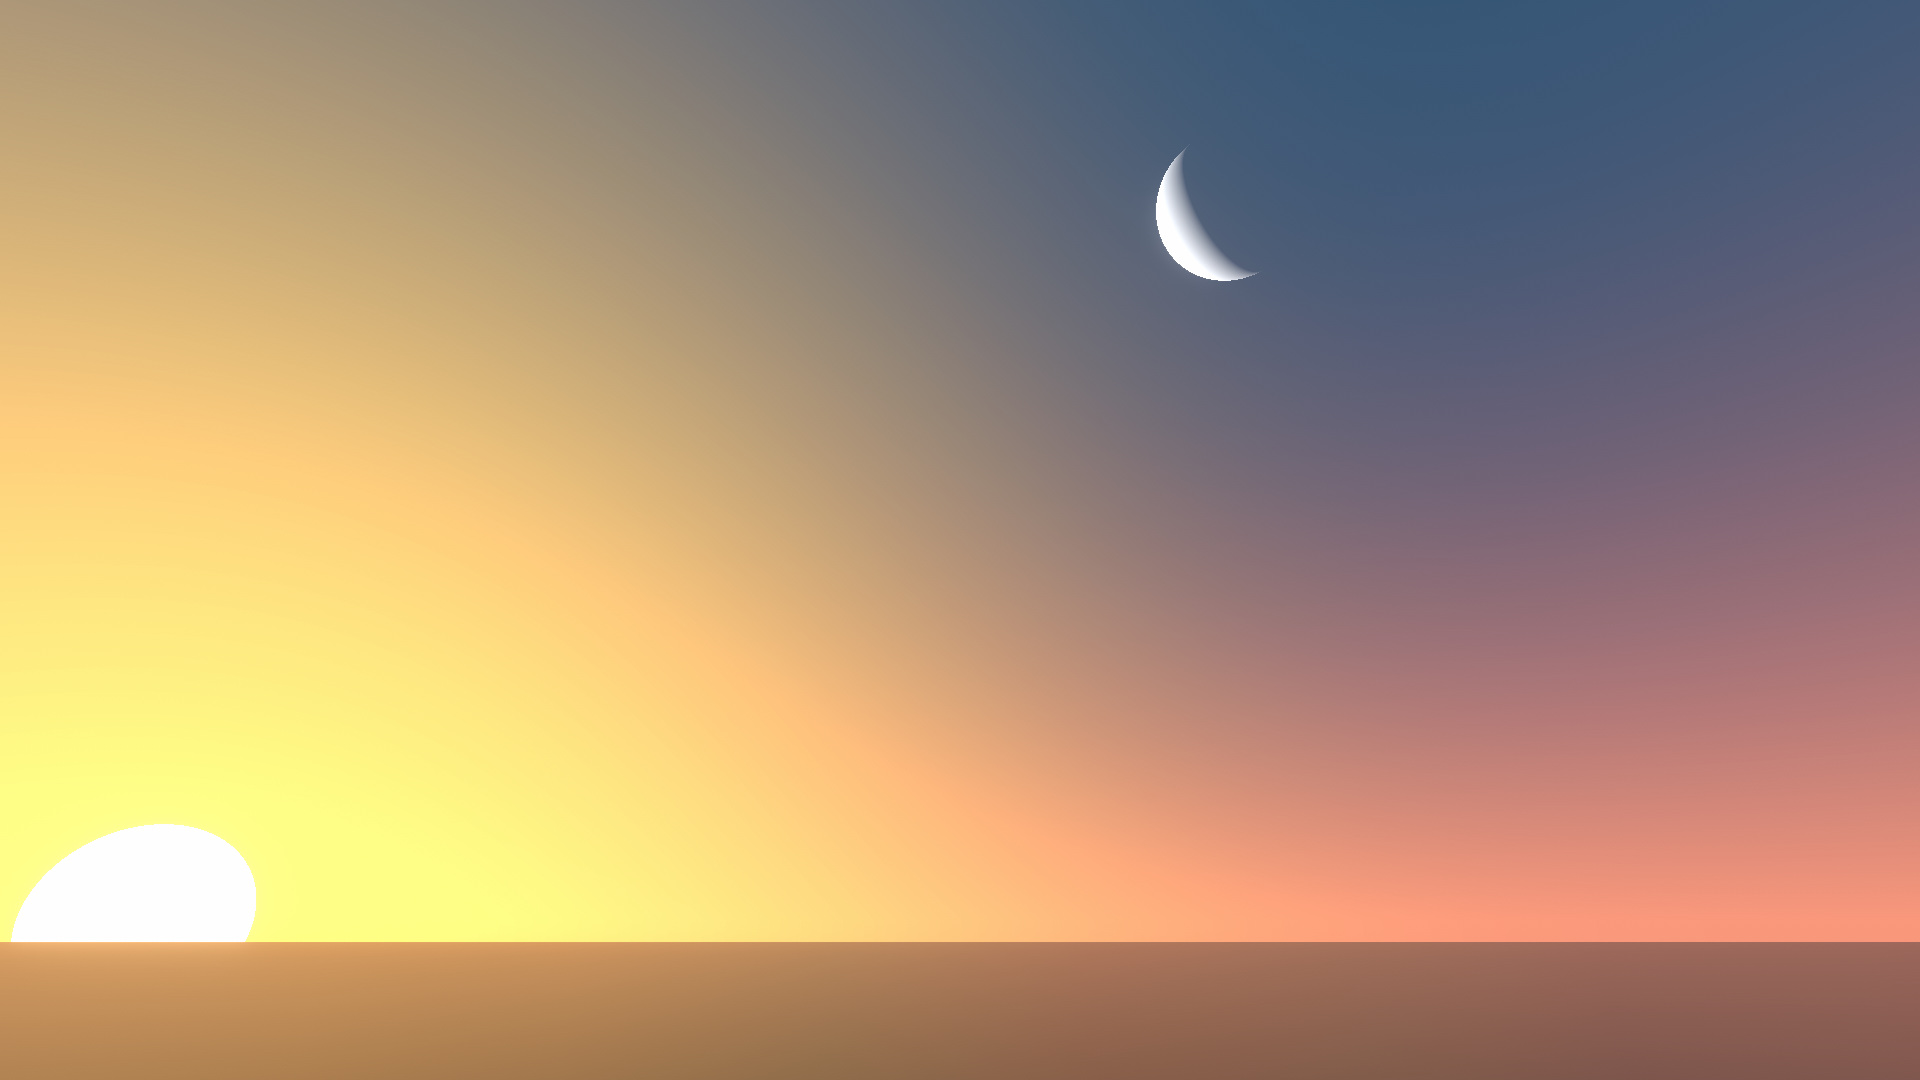 A partially lit moon during the setting sun, with moon exposure set to 1.